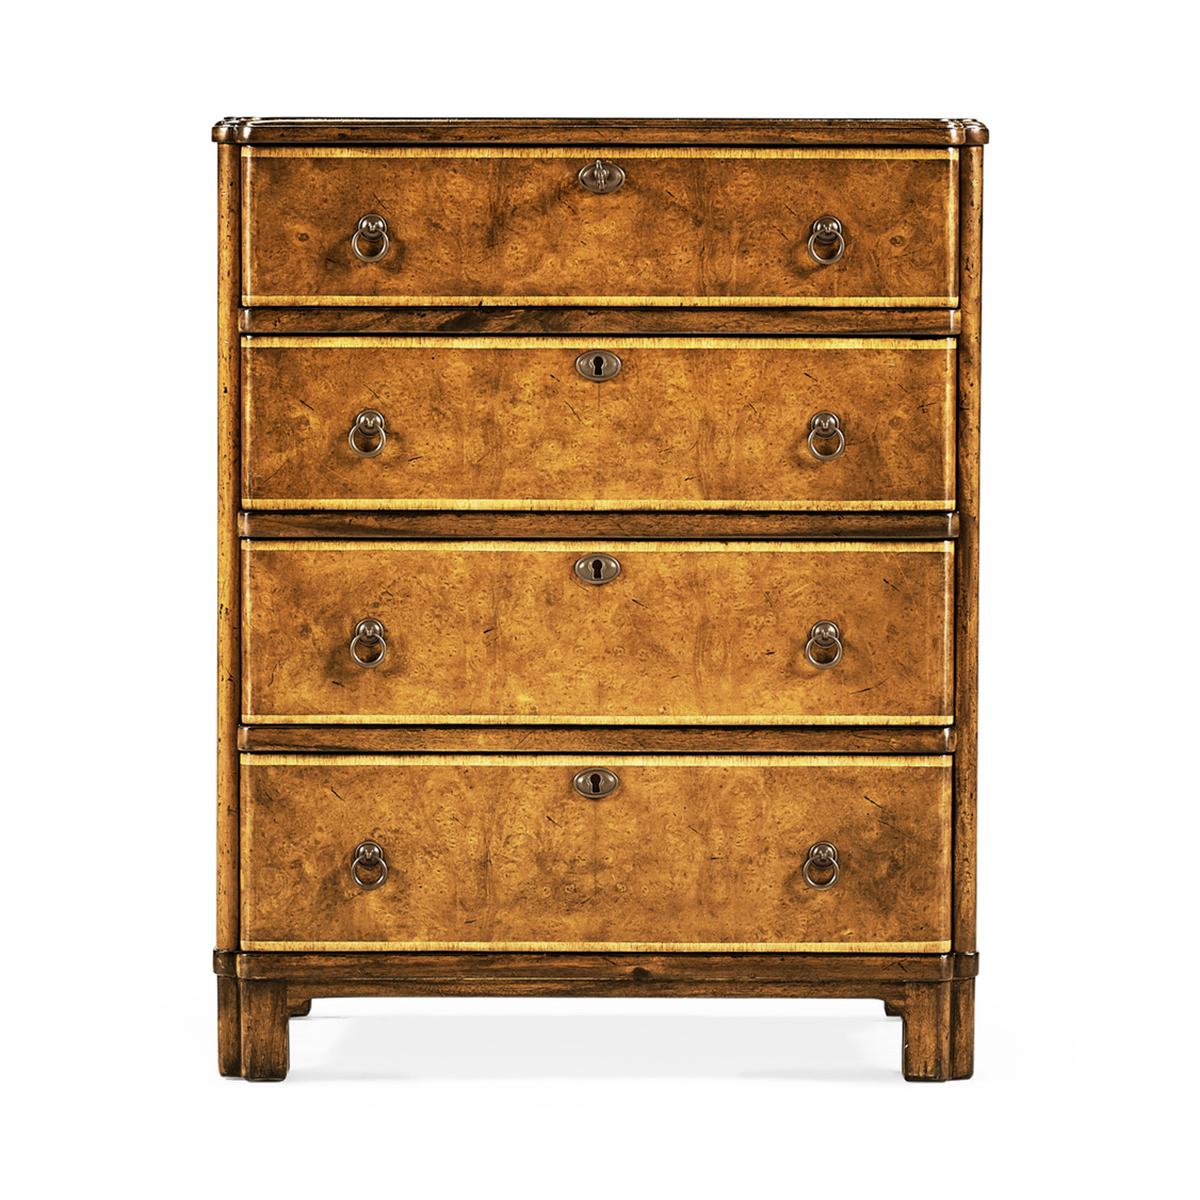 Practical chest of graduated drawers with a gently rounded profile to the front, decorative camphor wood veneers and crossbanding and patinated brass ring handles. Based on a Victorian original of c.1870.

Dimensions: 23.5